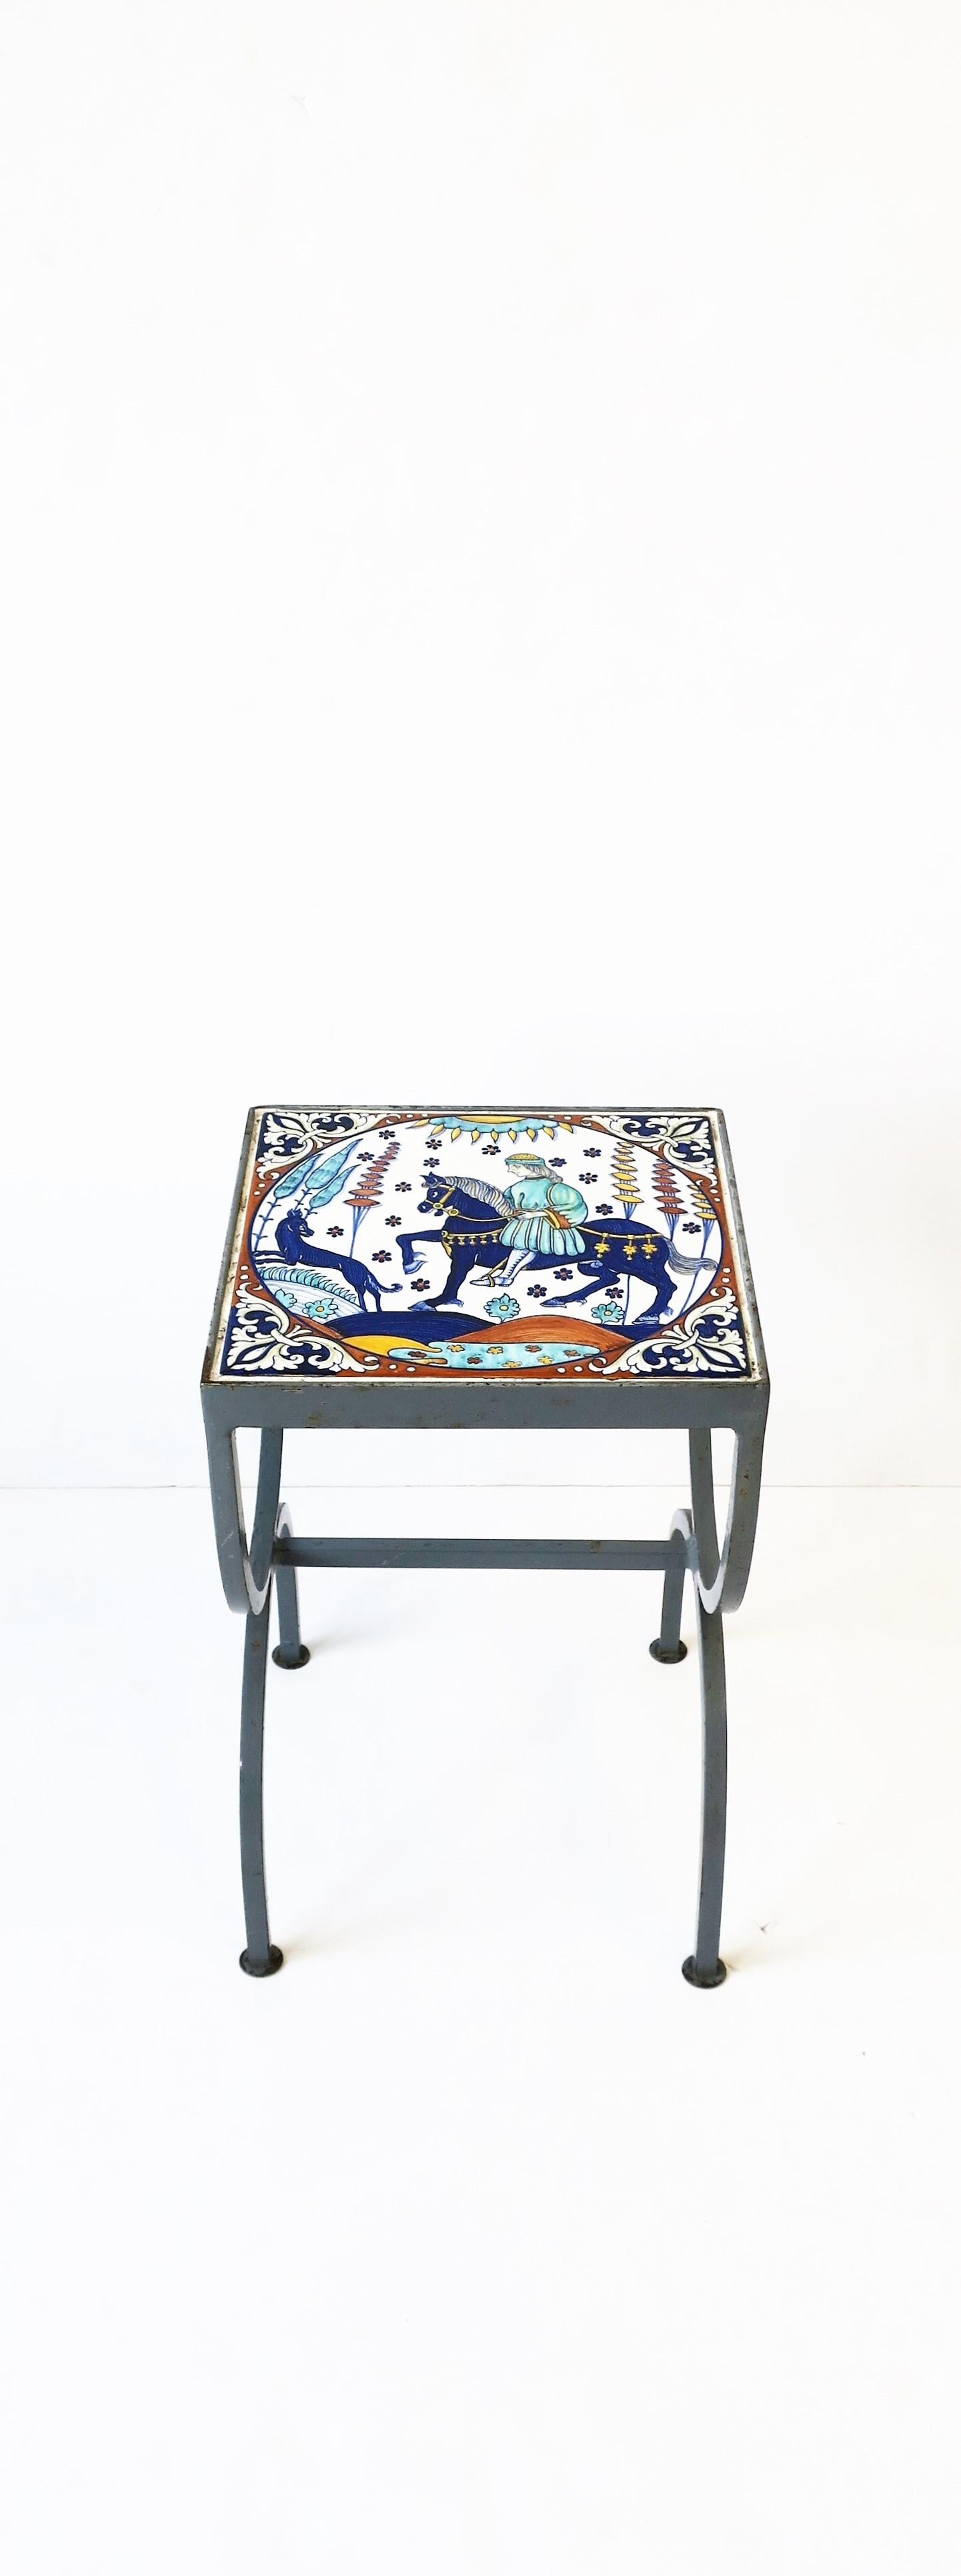 A small and substantial Roman equestrian ceramic tile top and grey metal side or drinks table, circa late 20th-early 21st century. Table's top is a single ceramic tile with a Roman design in the style of Hermes. Tables' base is metal with a grey